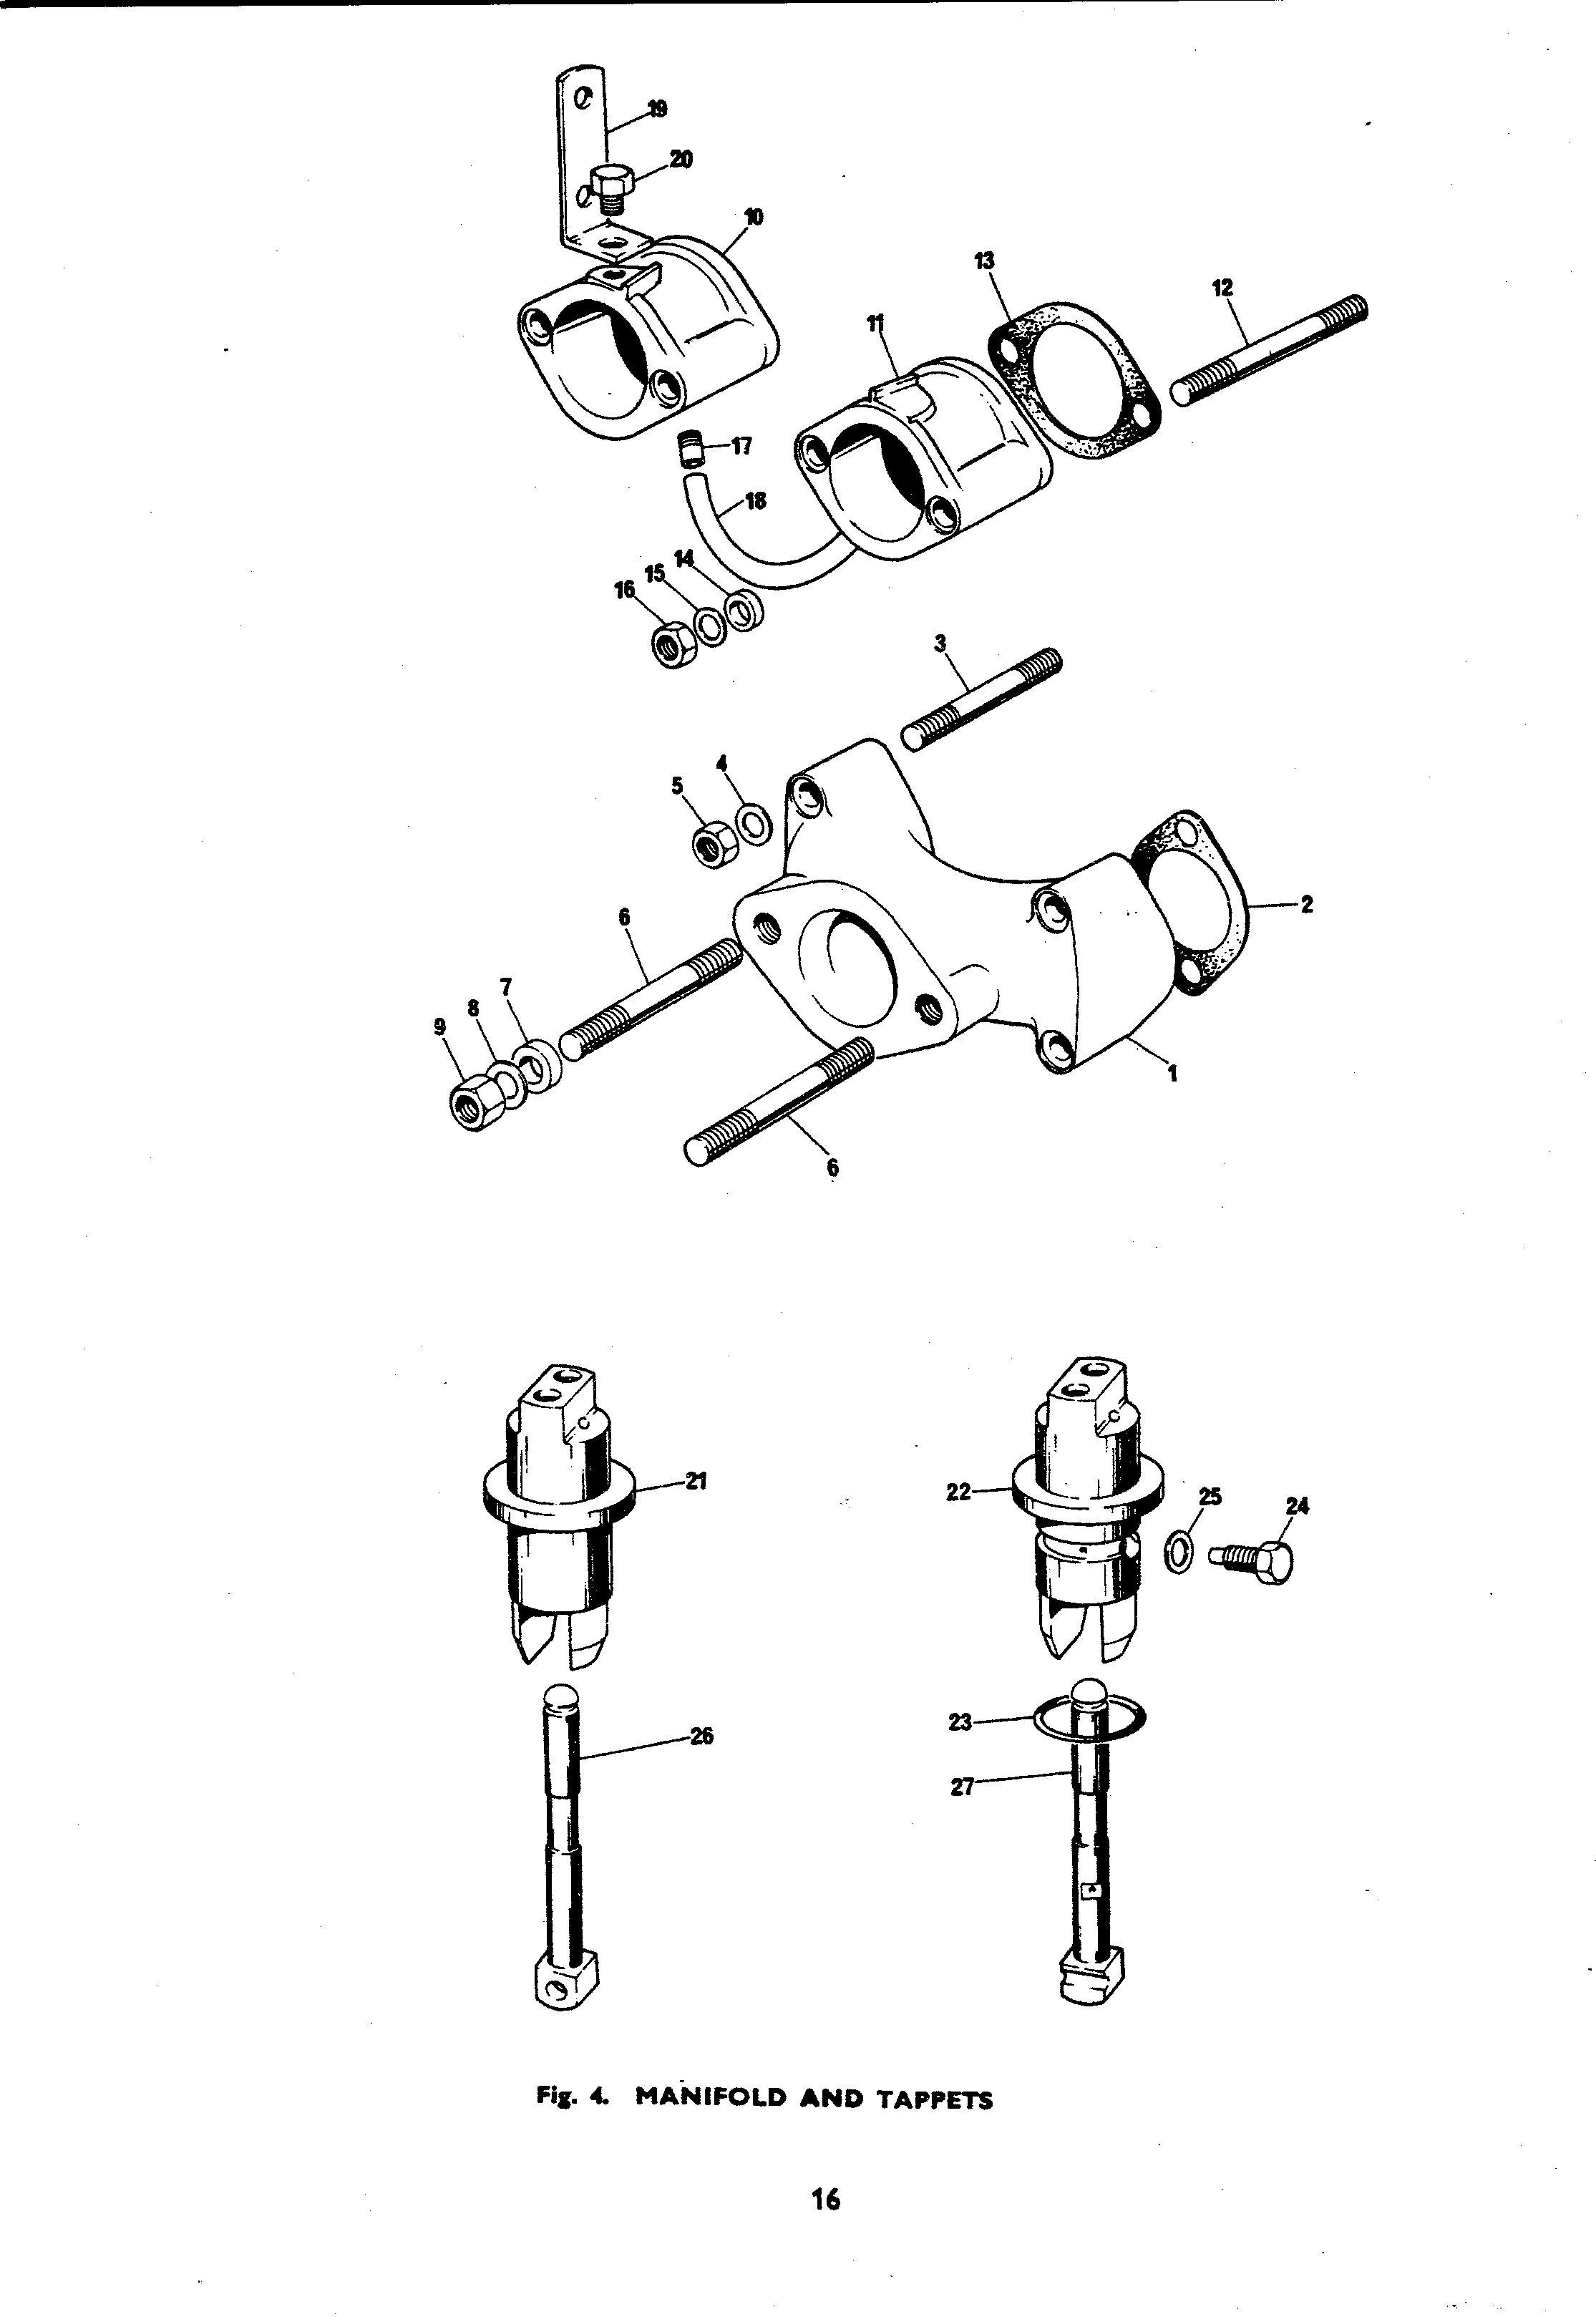 manifold & tappets diagram